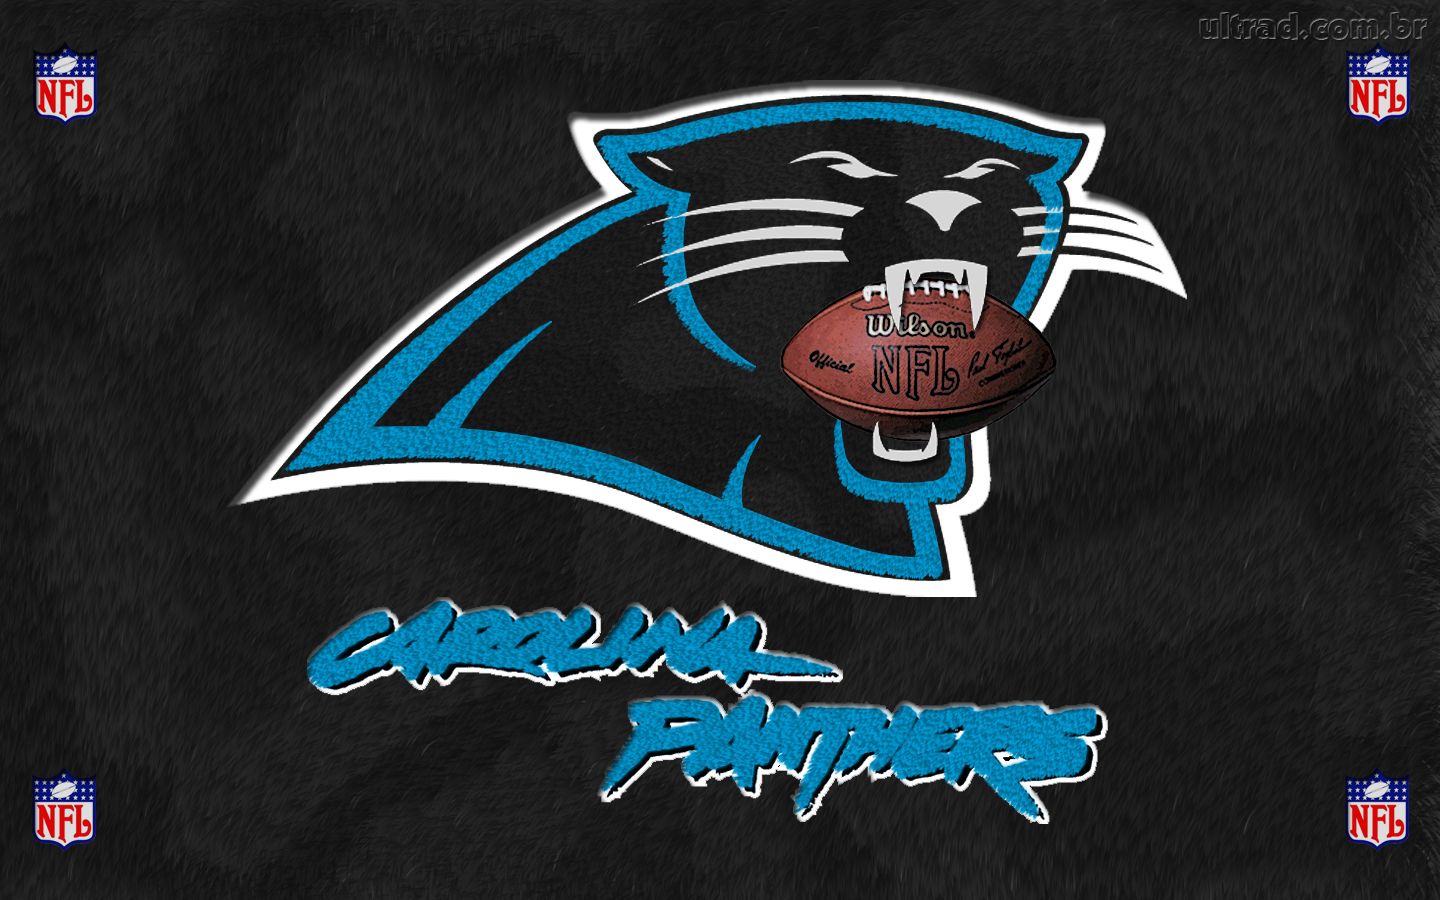 Carolina Panthers Wallpaper Collection For Download 1440x900